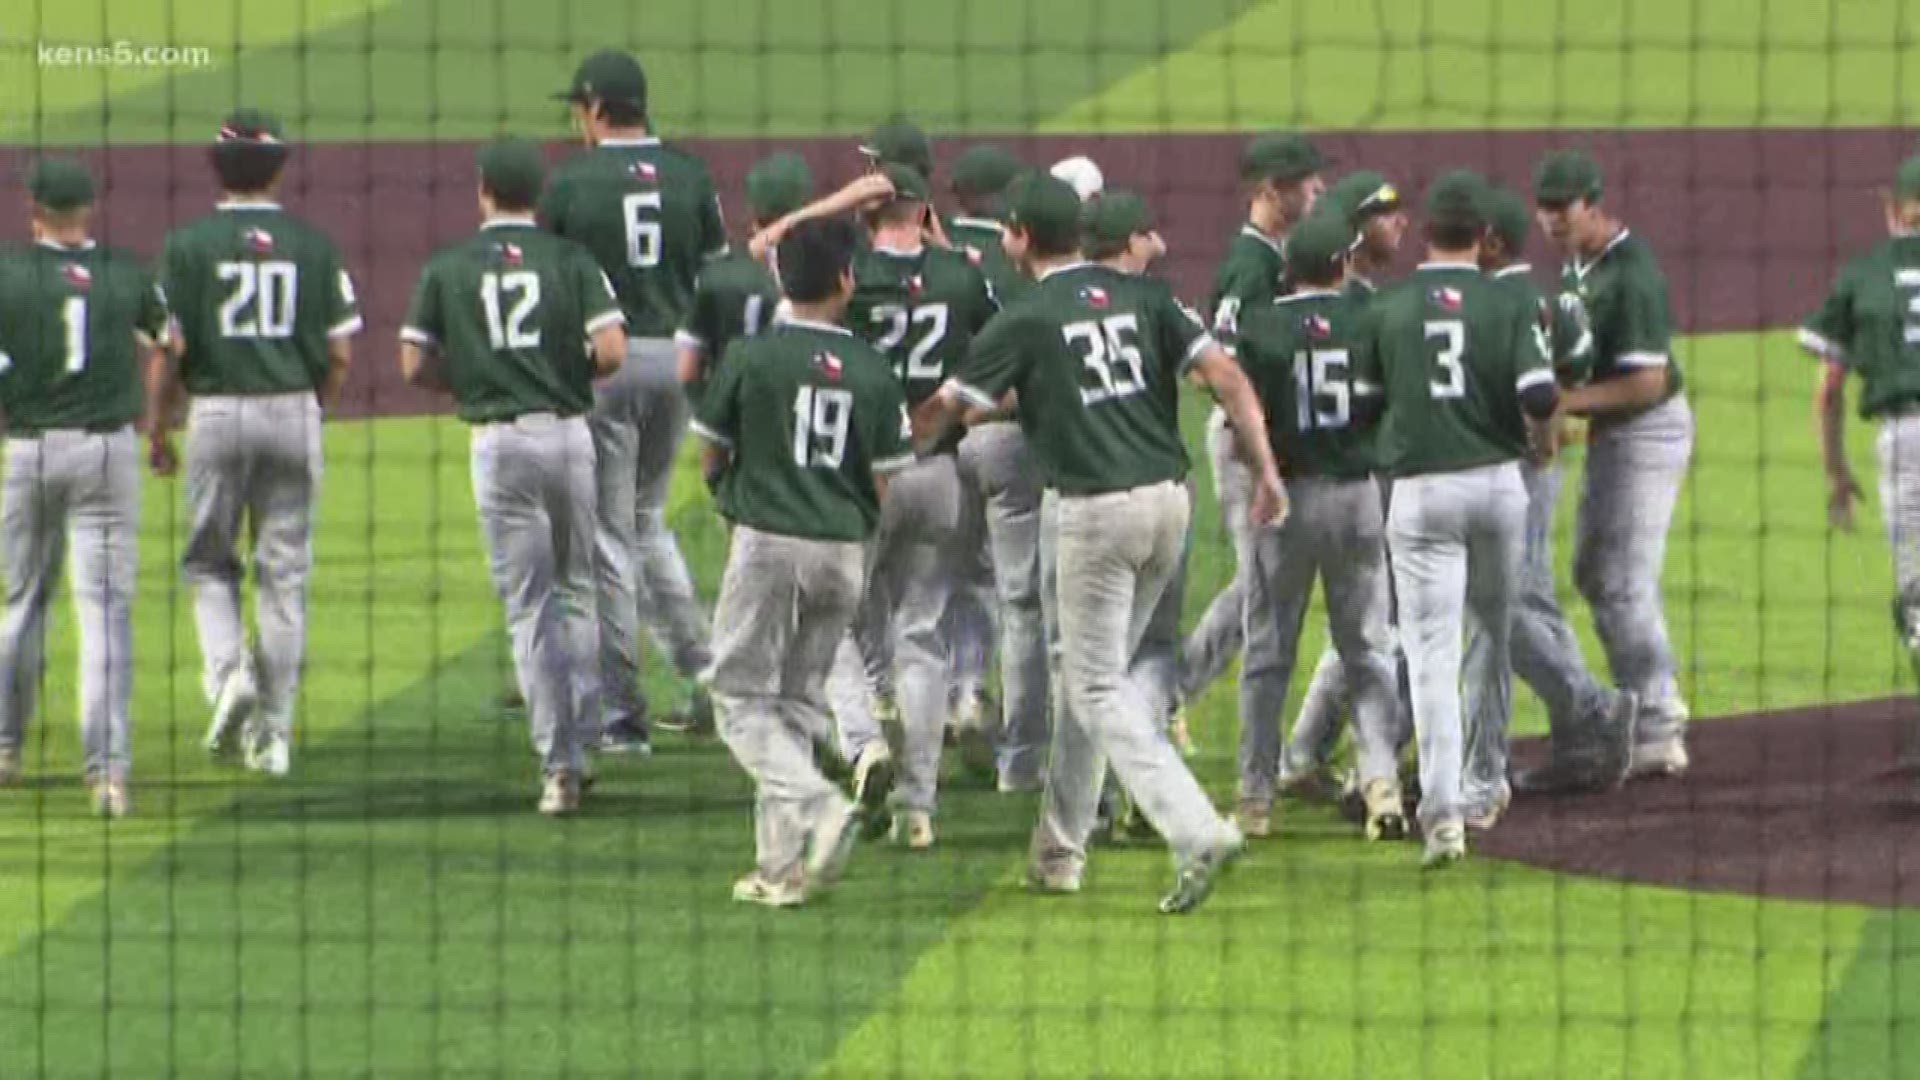 The Reagan Rattlers swept through O’Connor two games to none last week to open their post season run. They’ll look to continue that success starting Thursday night hosting Buda Hays at the Northeast Sports Park.